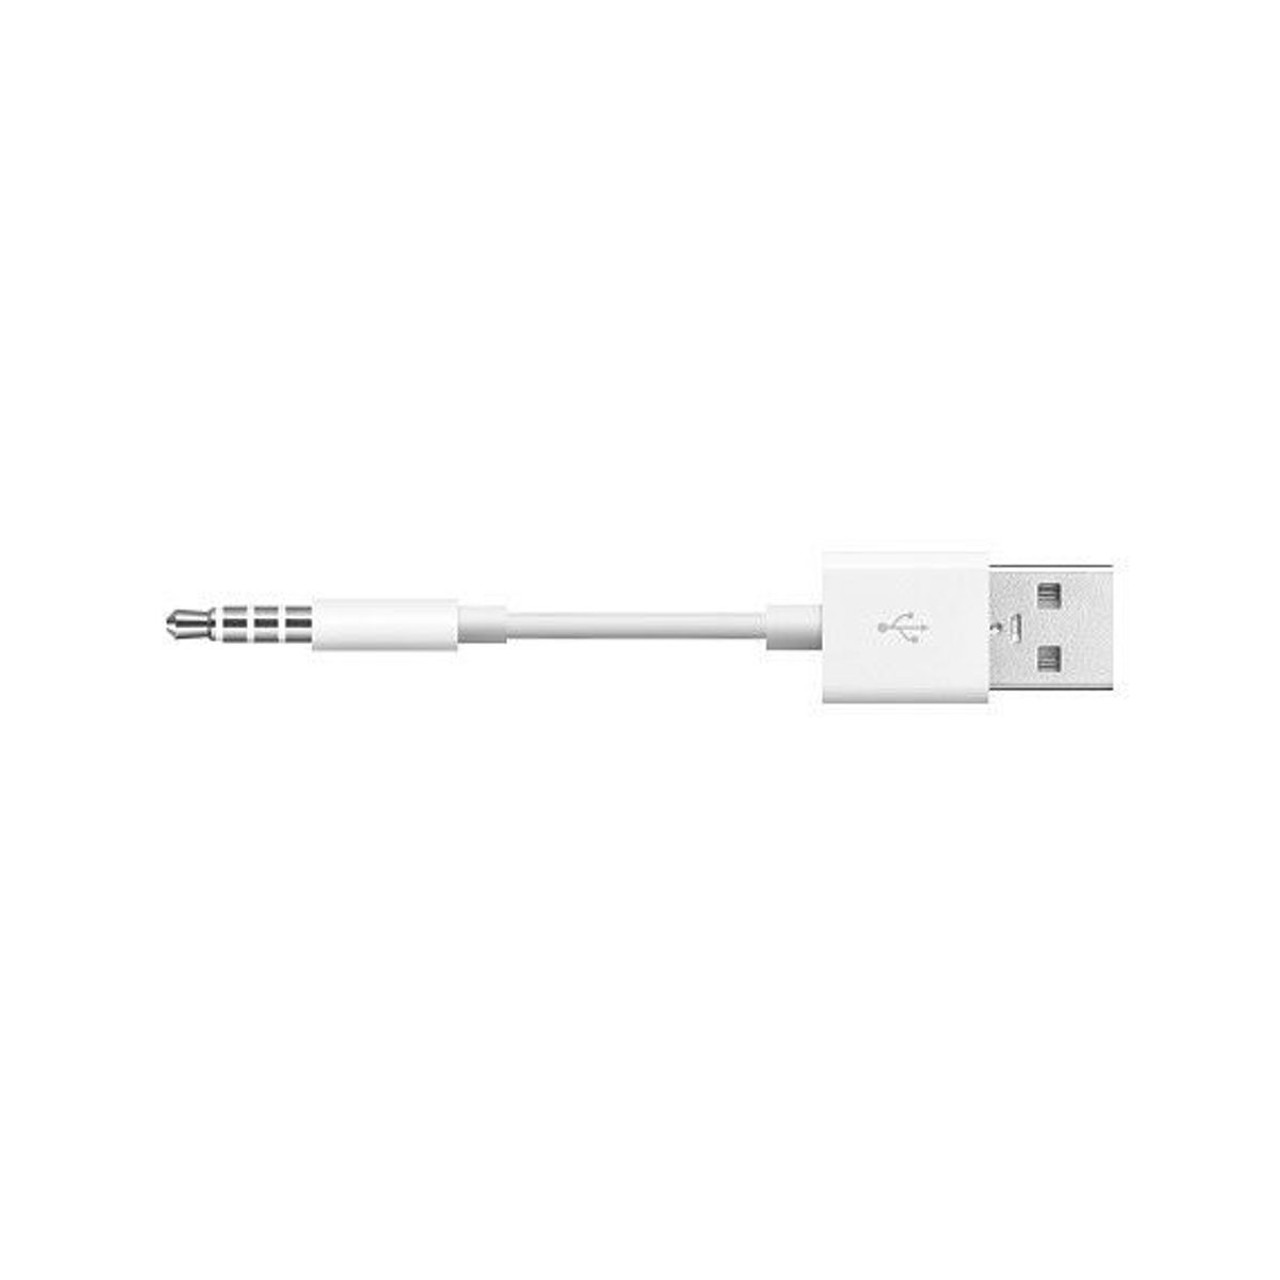 Apple USB Cable for iPod Shuffle product image